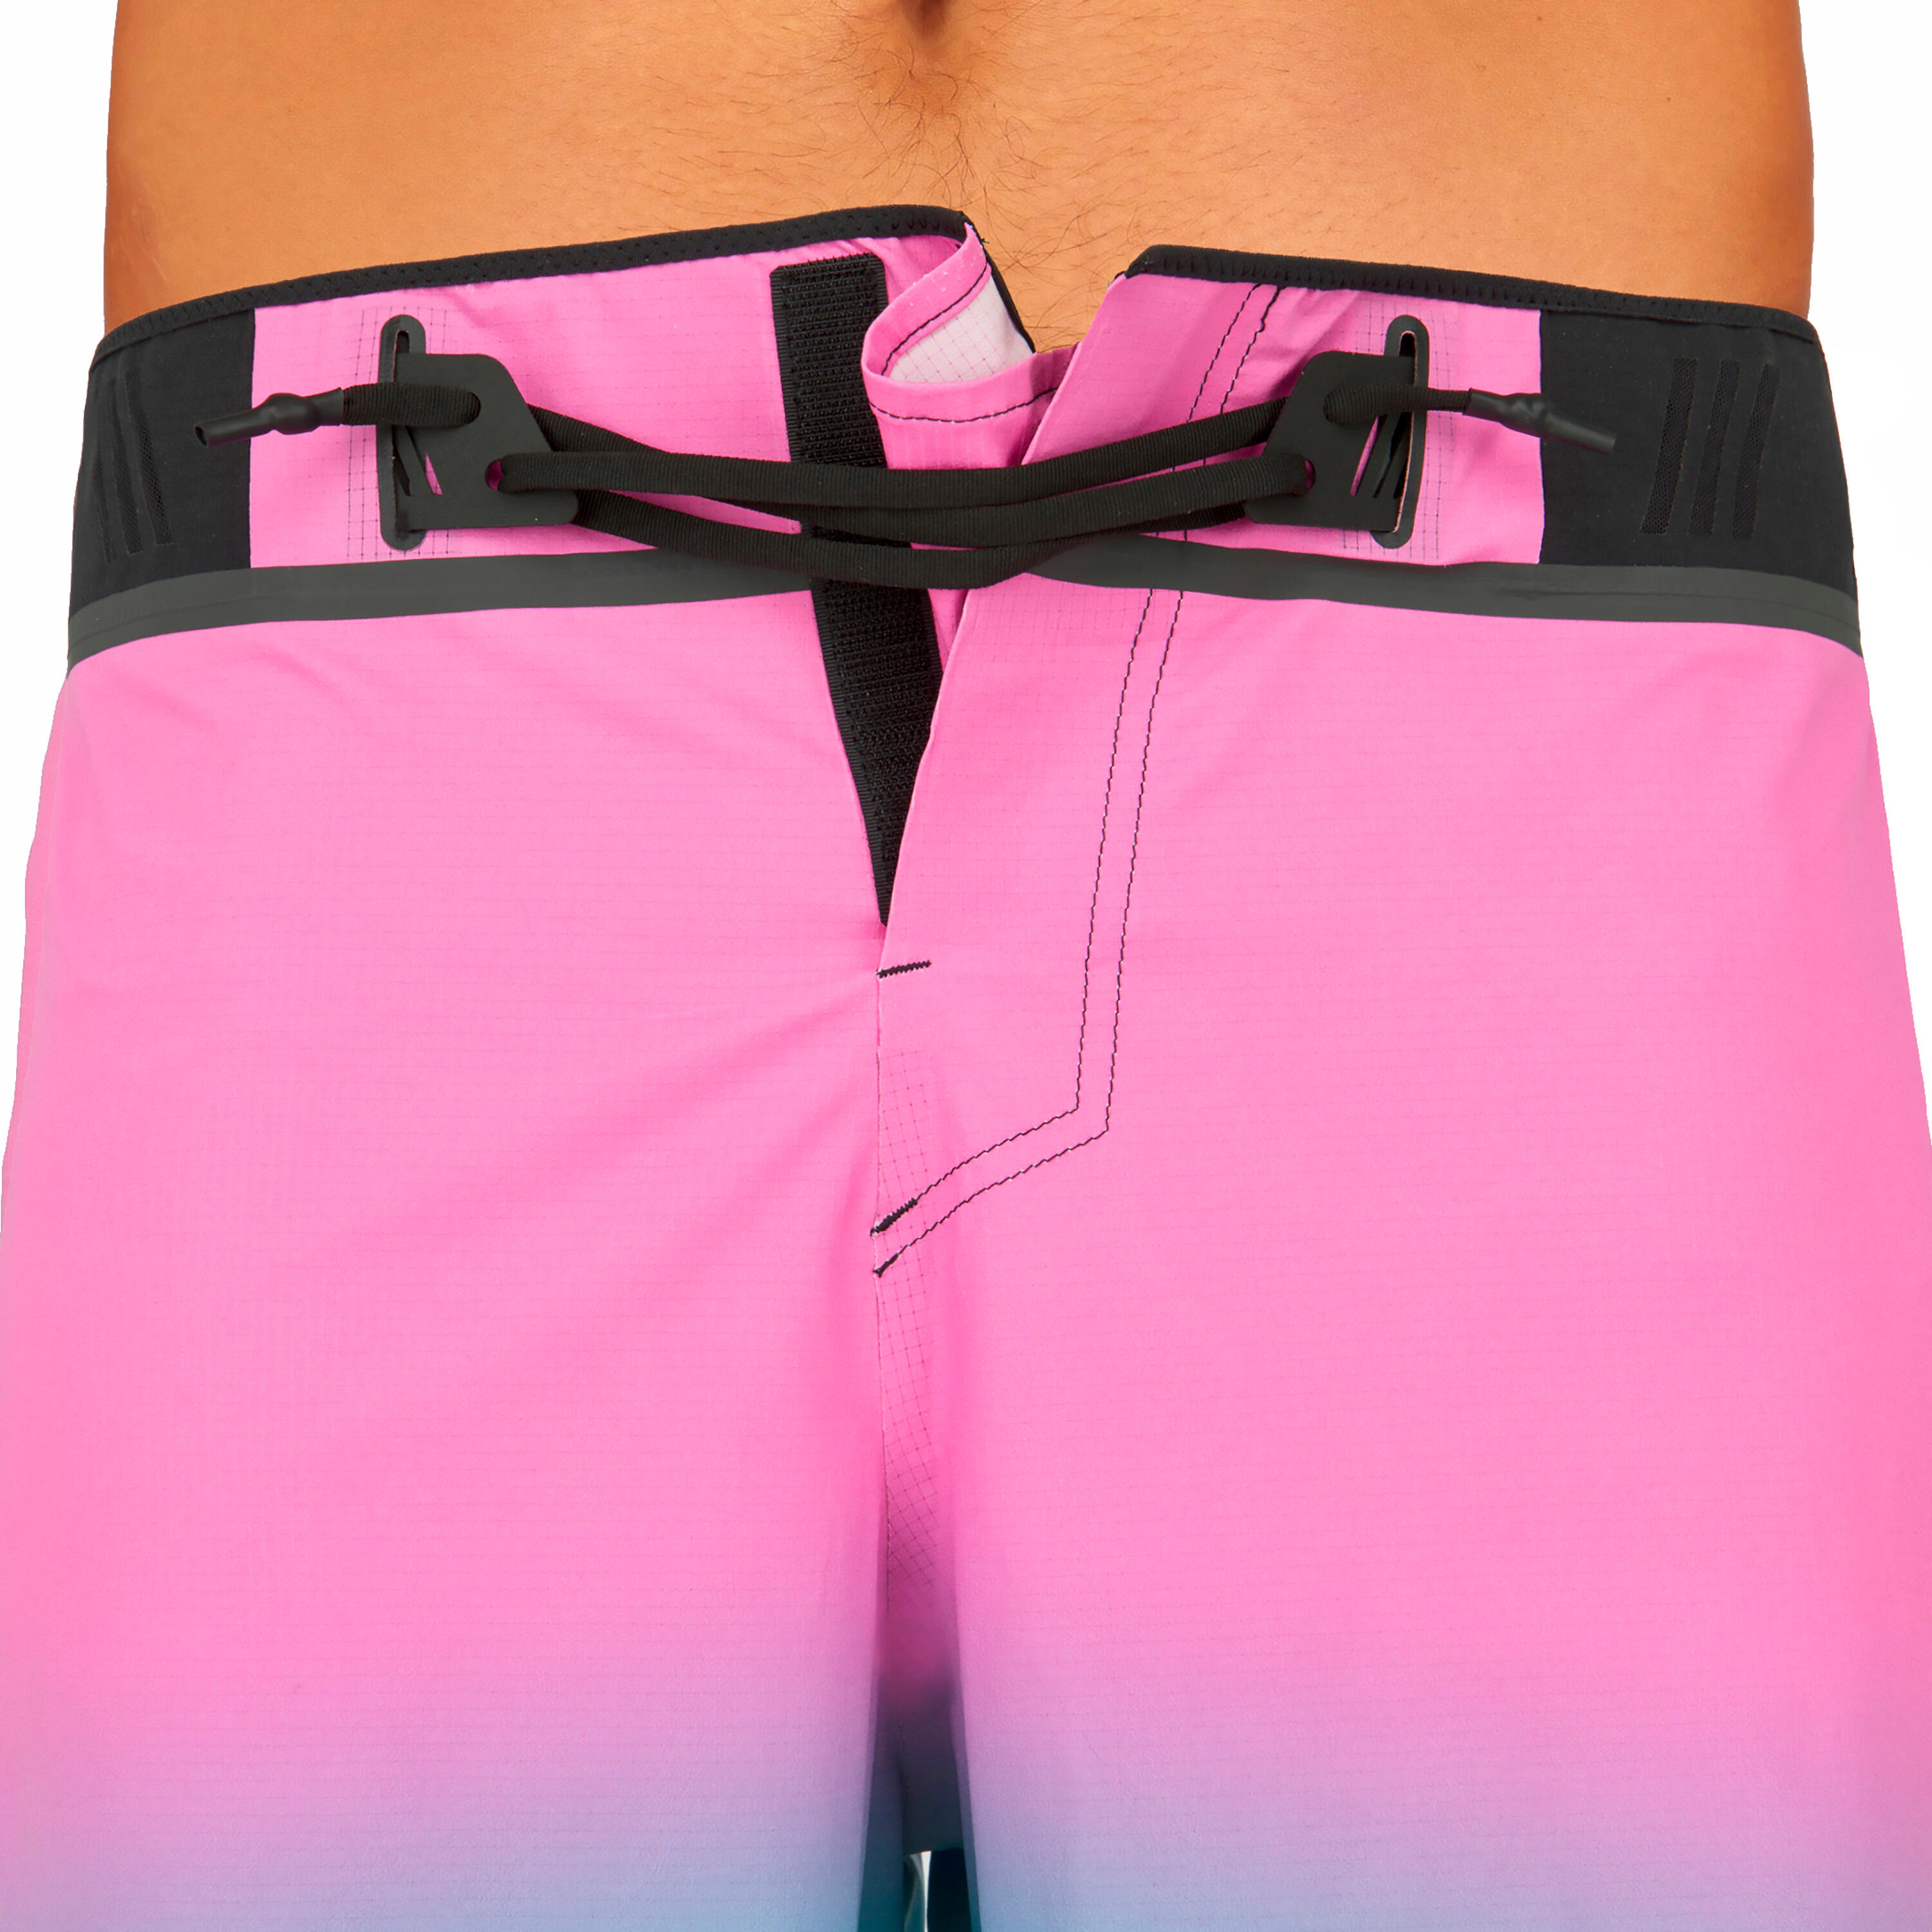 Long Surfing Boardshorts 900 - Grungy Pink. 9/12